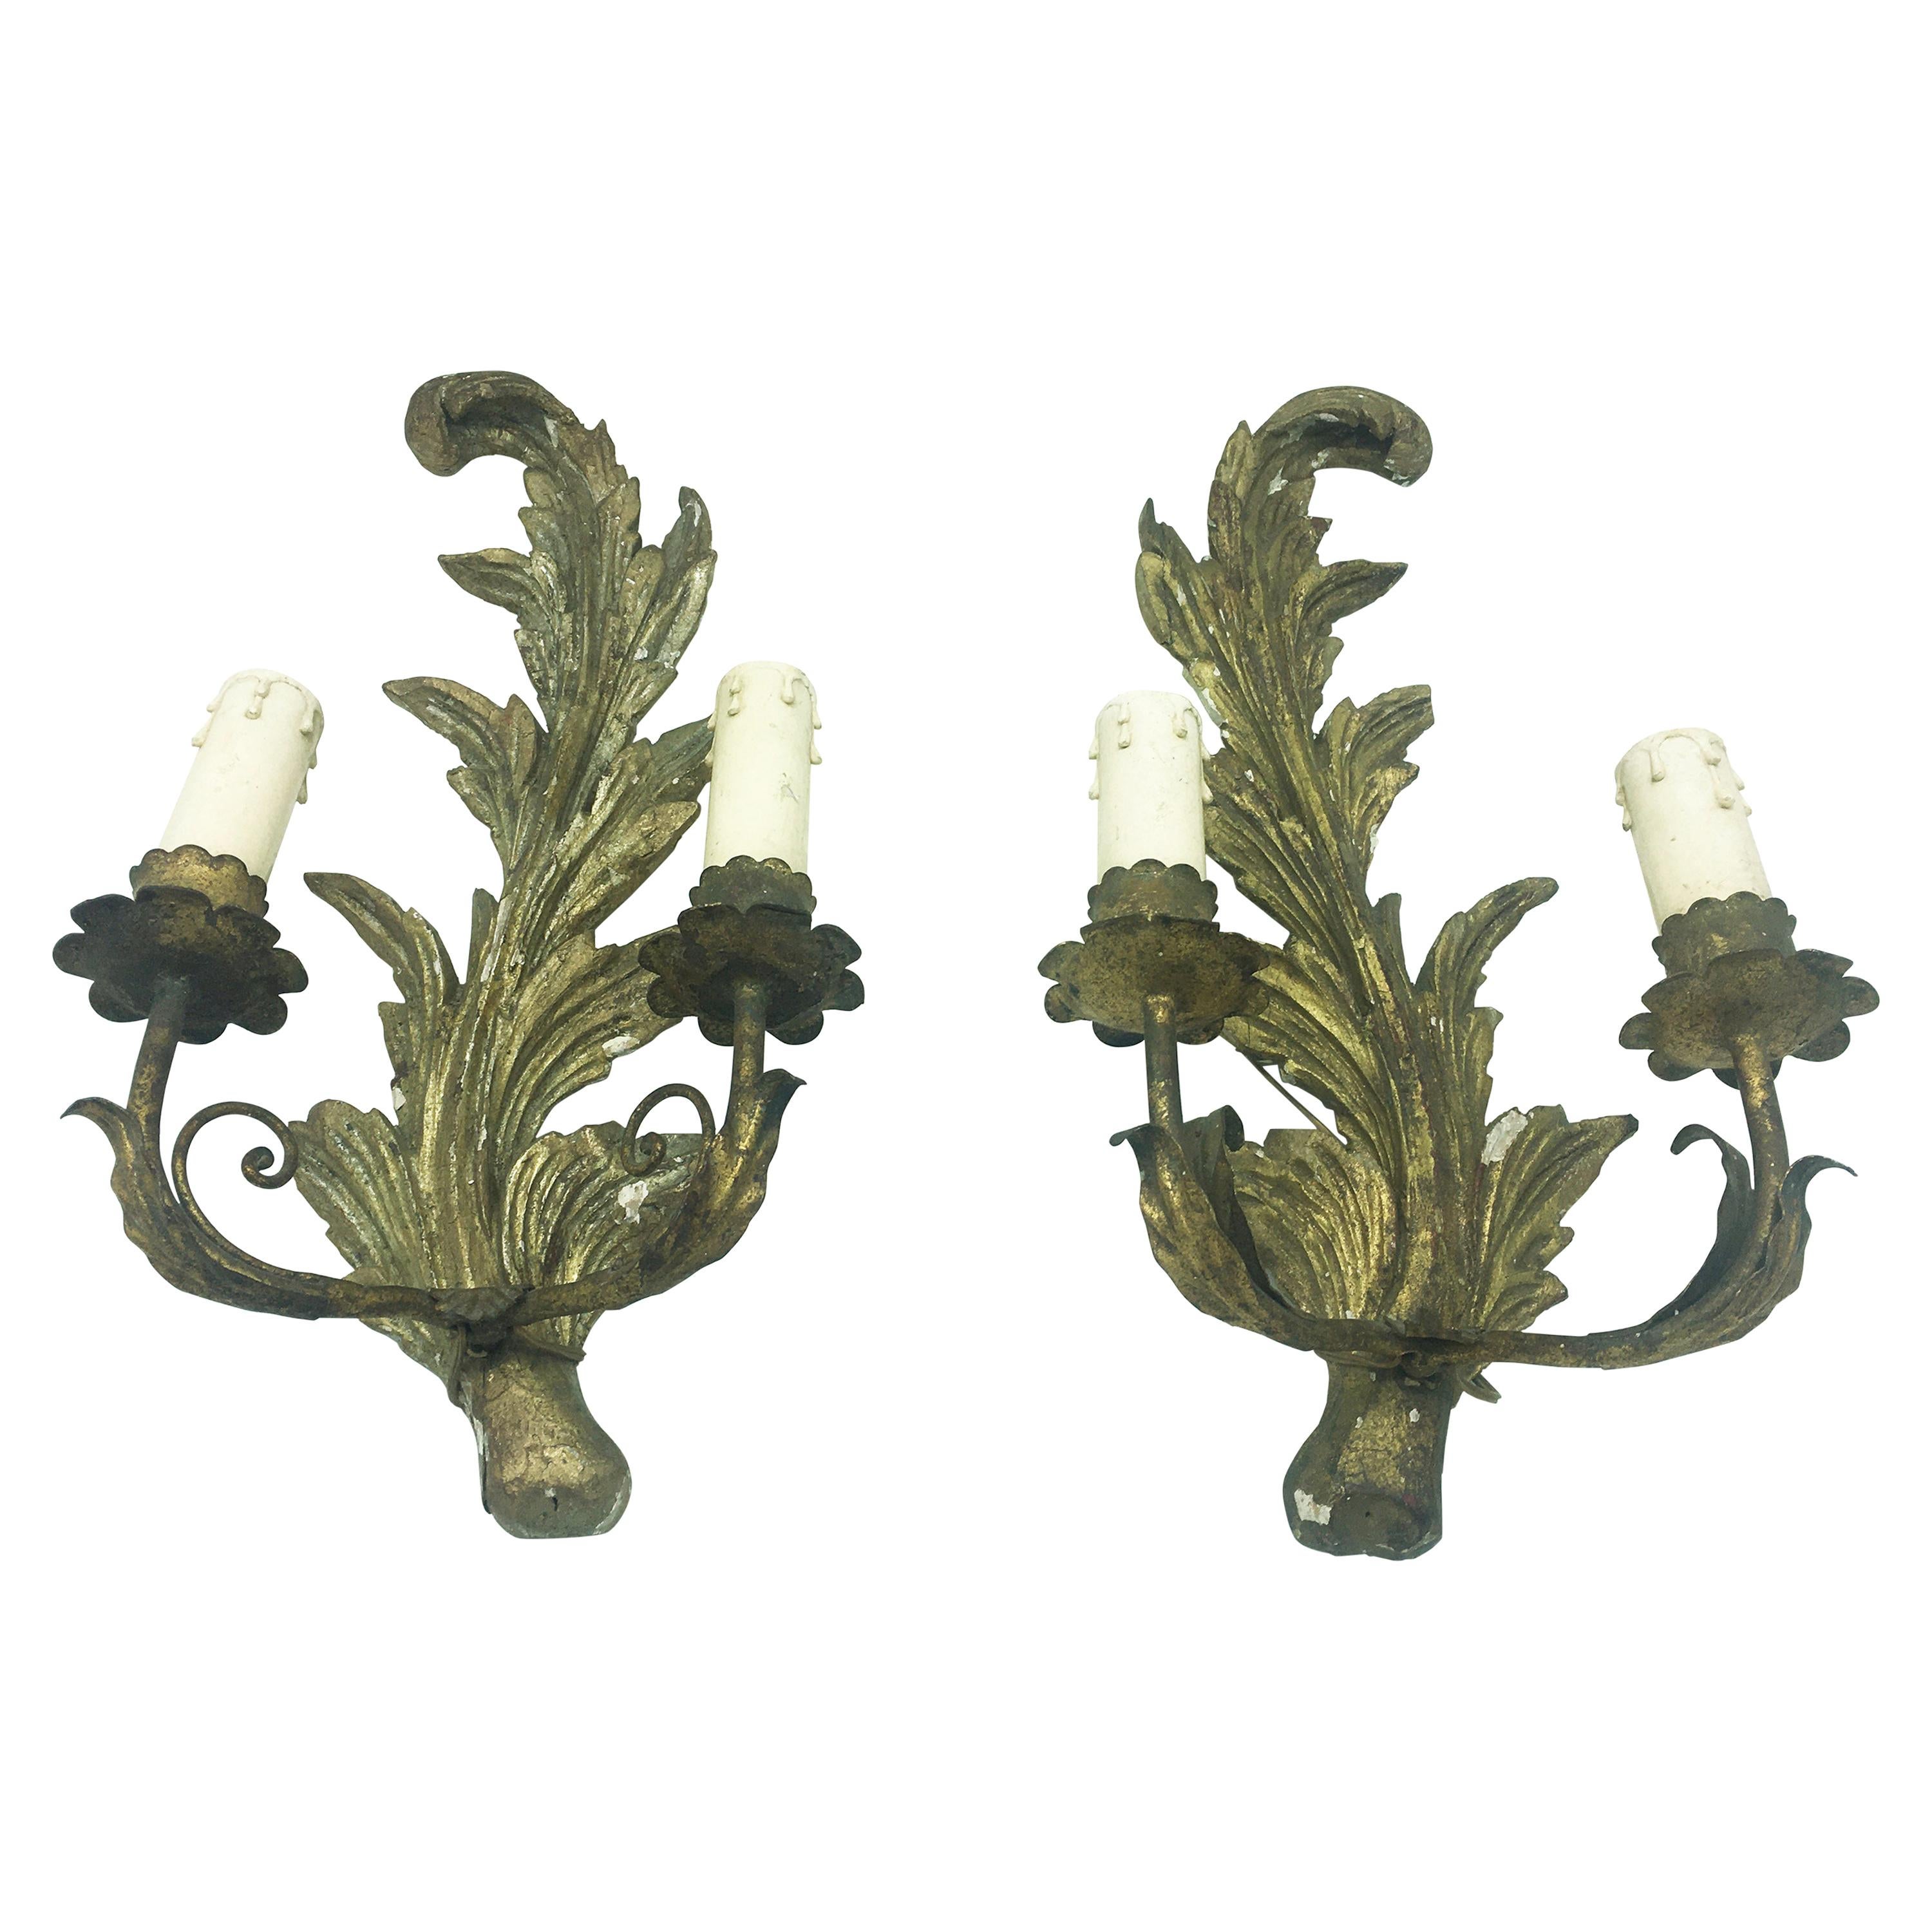 Exceptional Pair of Italian Giltwood Wall Appliques For Sale